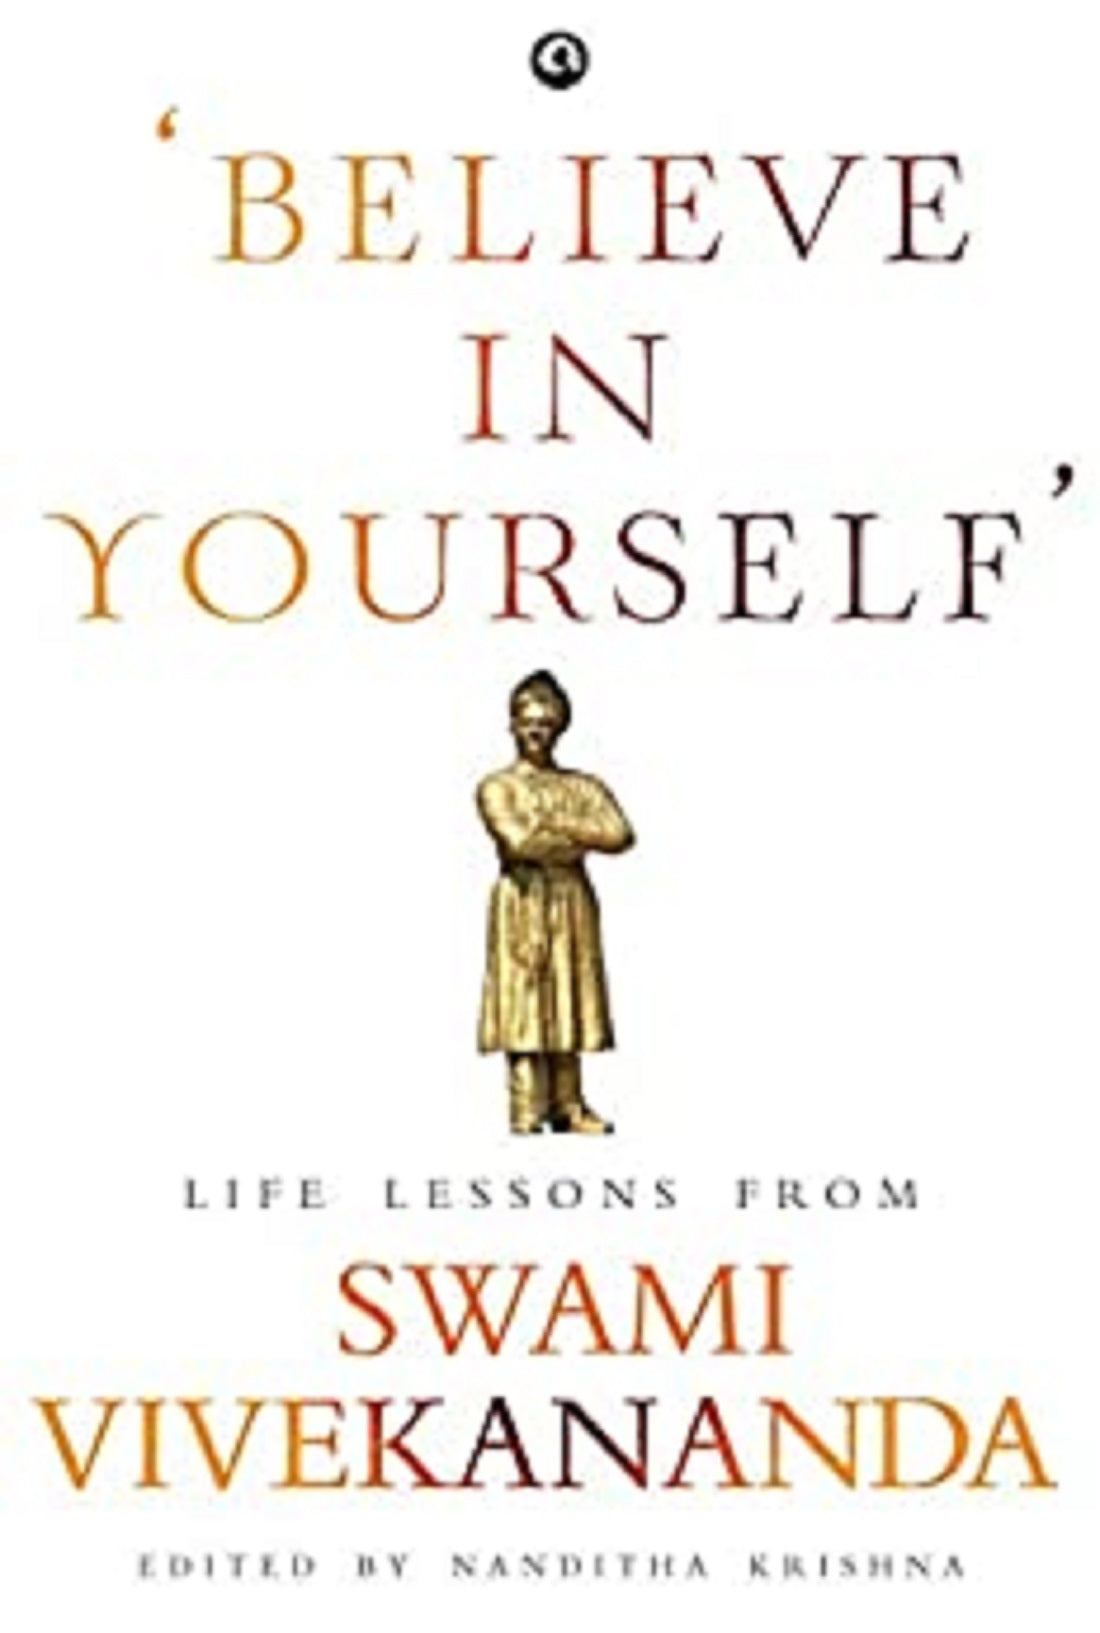 BELIEVE IN YOURSELF LIFE LESSONS FROM SWAMI VIVEKANANDA